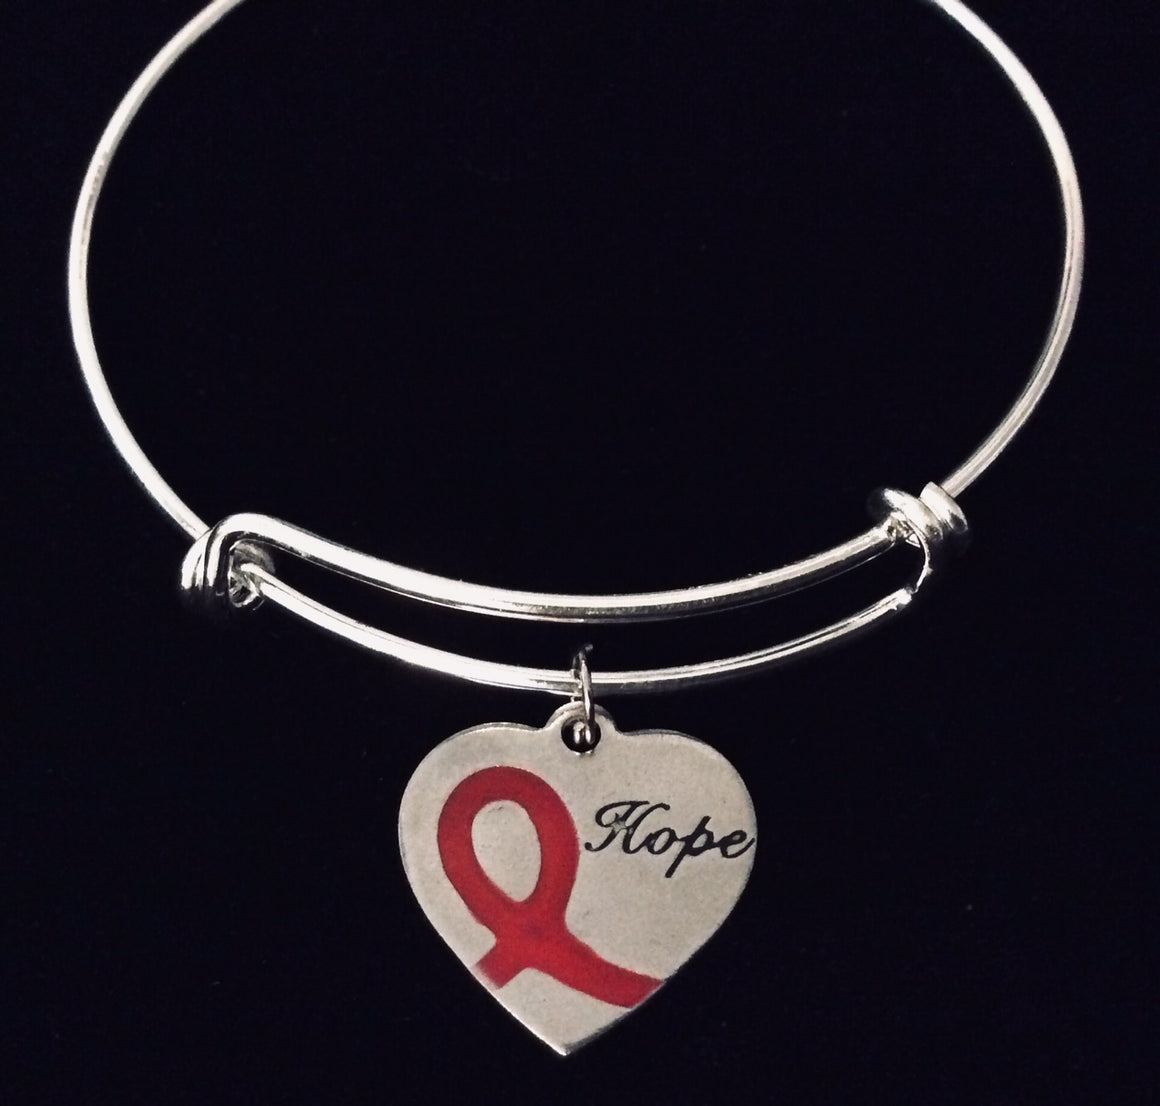 Red Ribbon of Hope Awareness Jewelry Adjustable Charm Bracelet Expandable One Size Fits All Gift